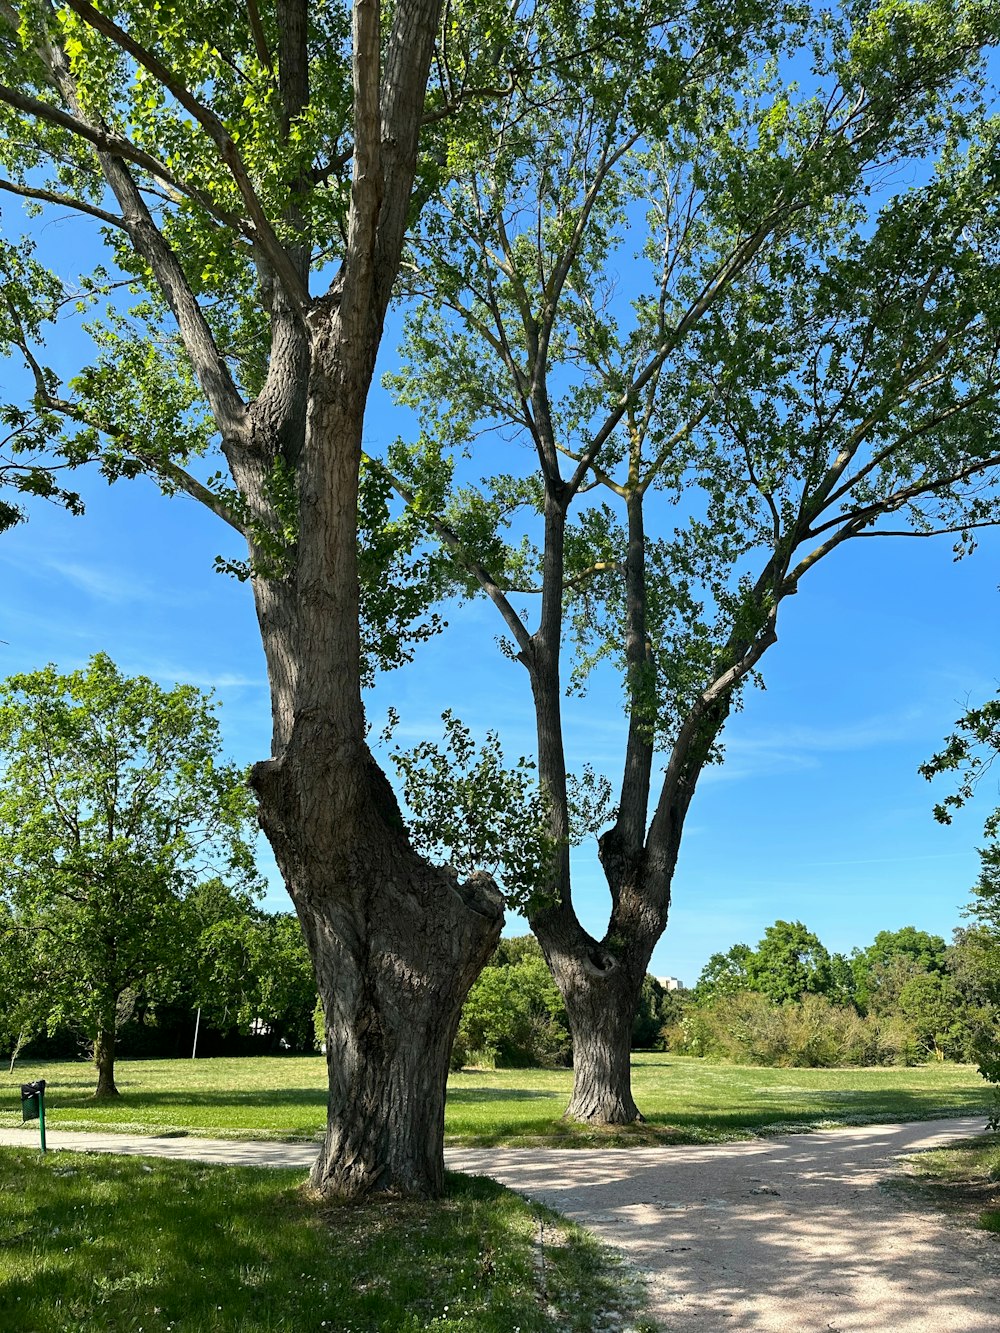 two large trees in a grassy area next to a path